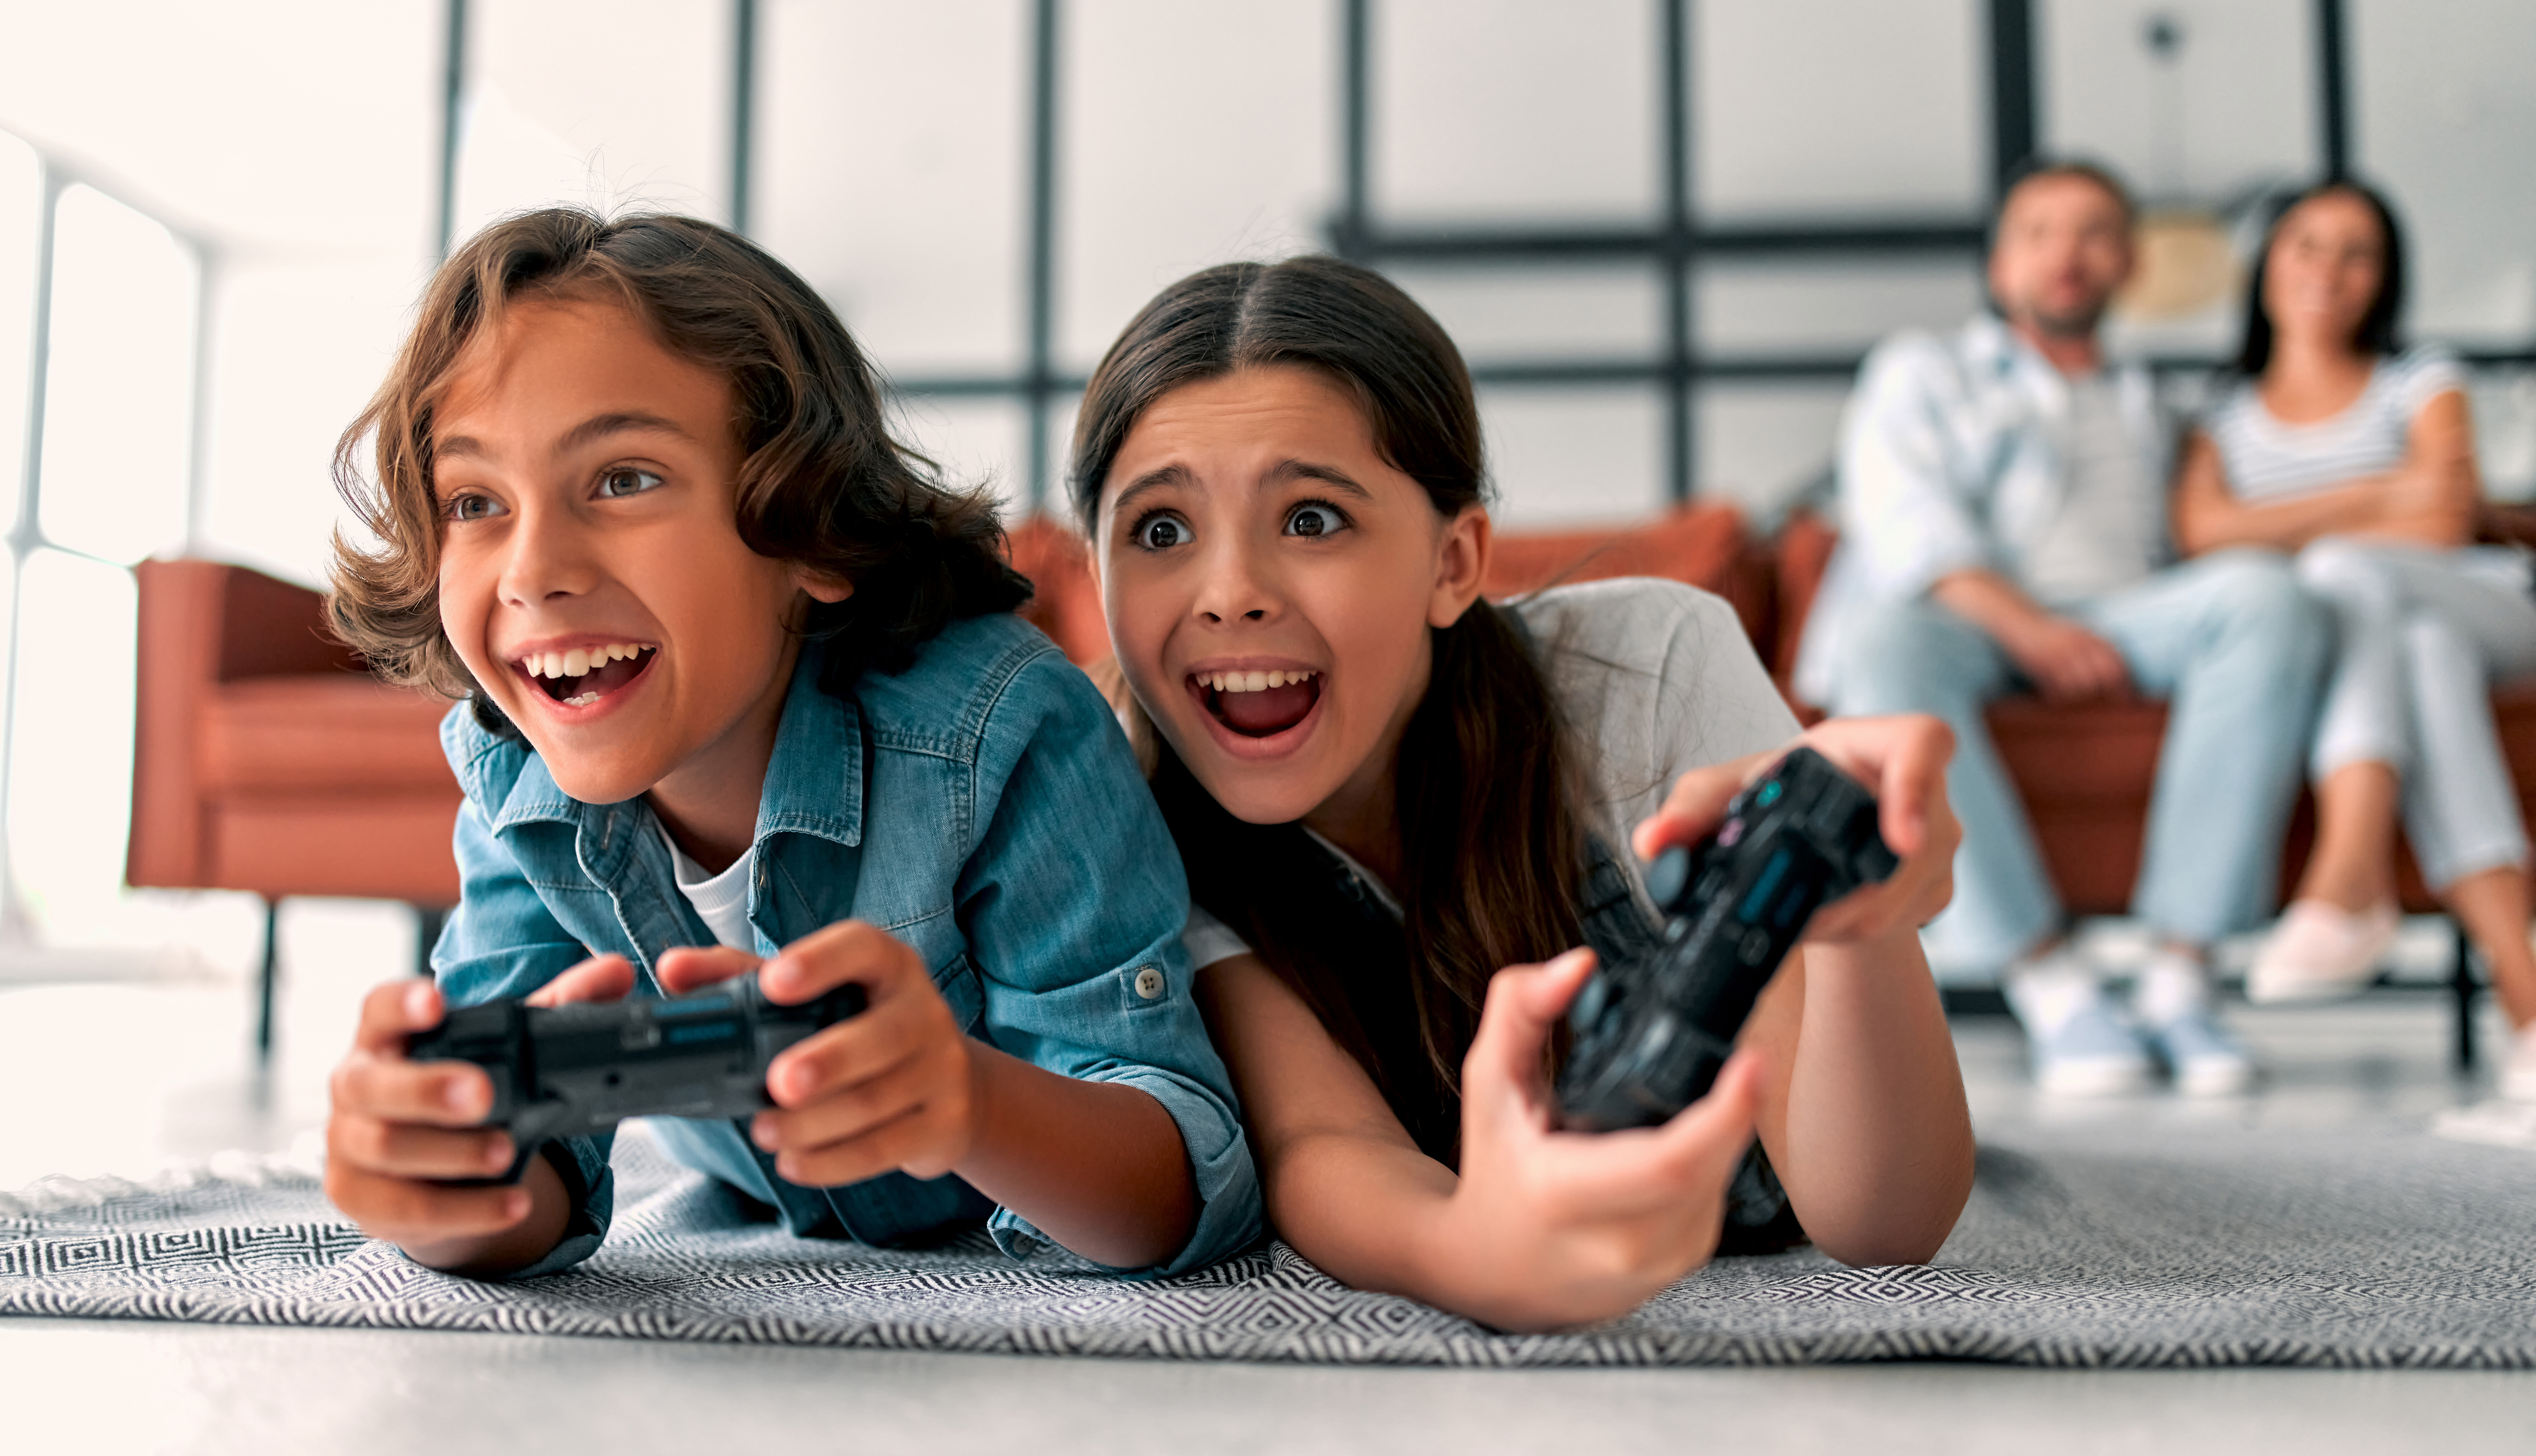 Online gaming safety: Tips to prevent cyberbullying and more